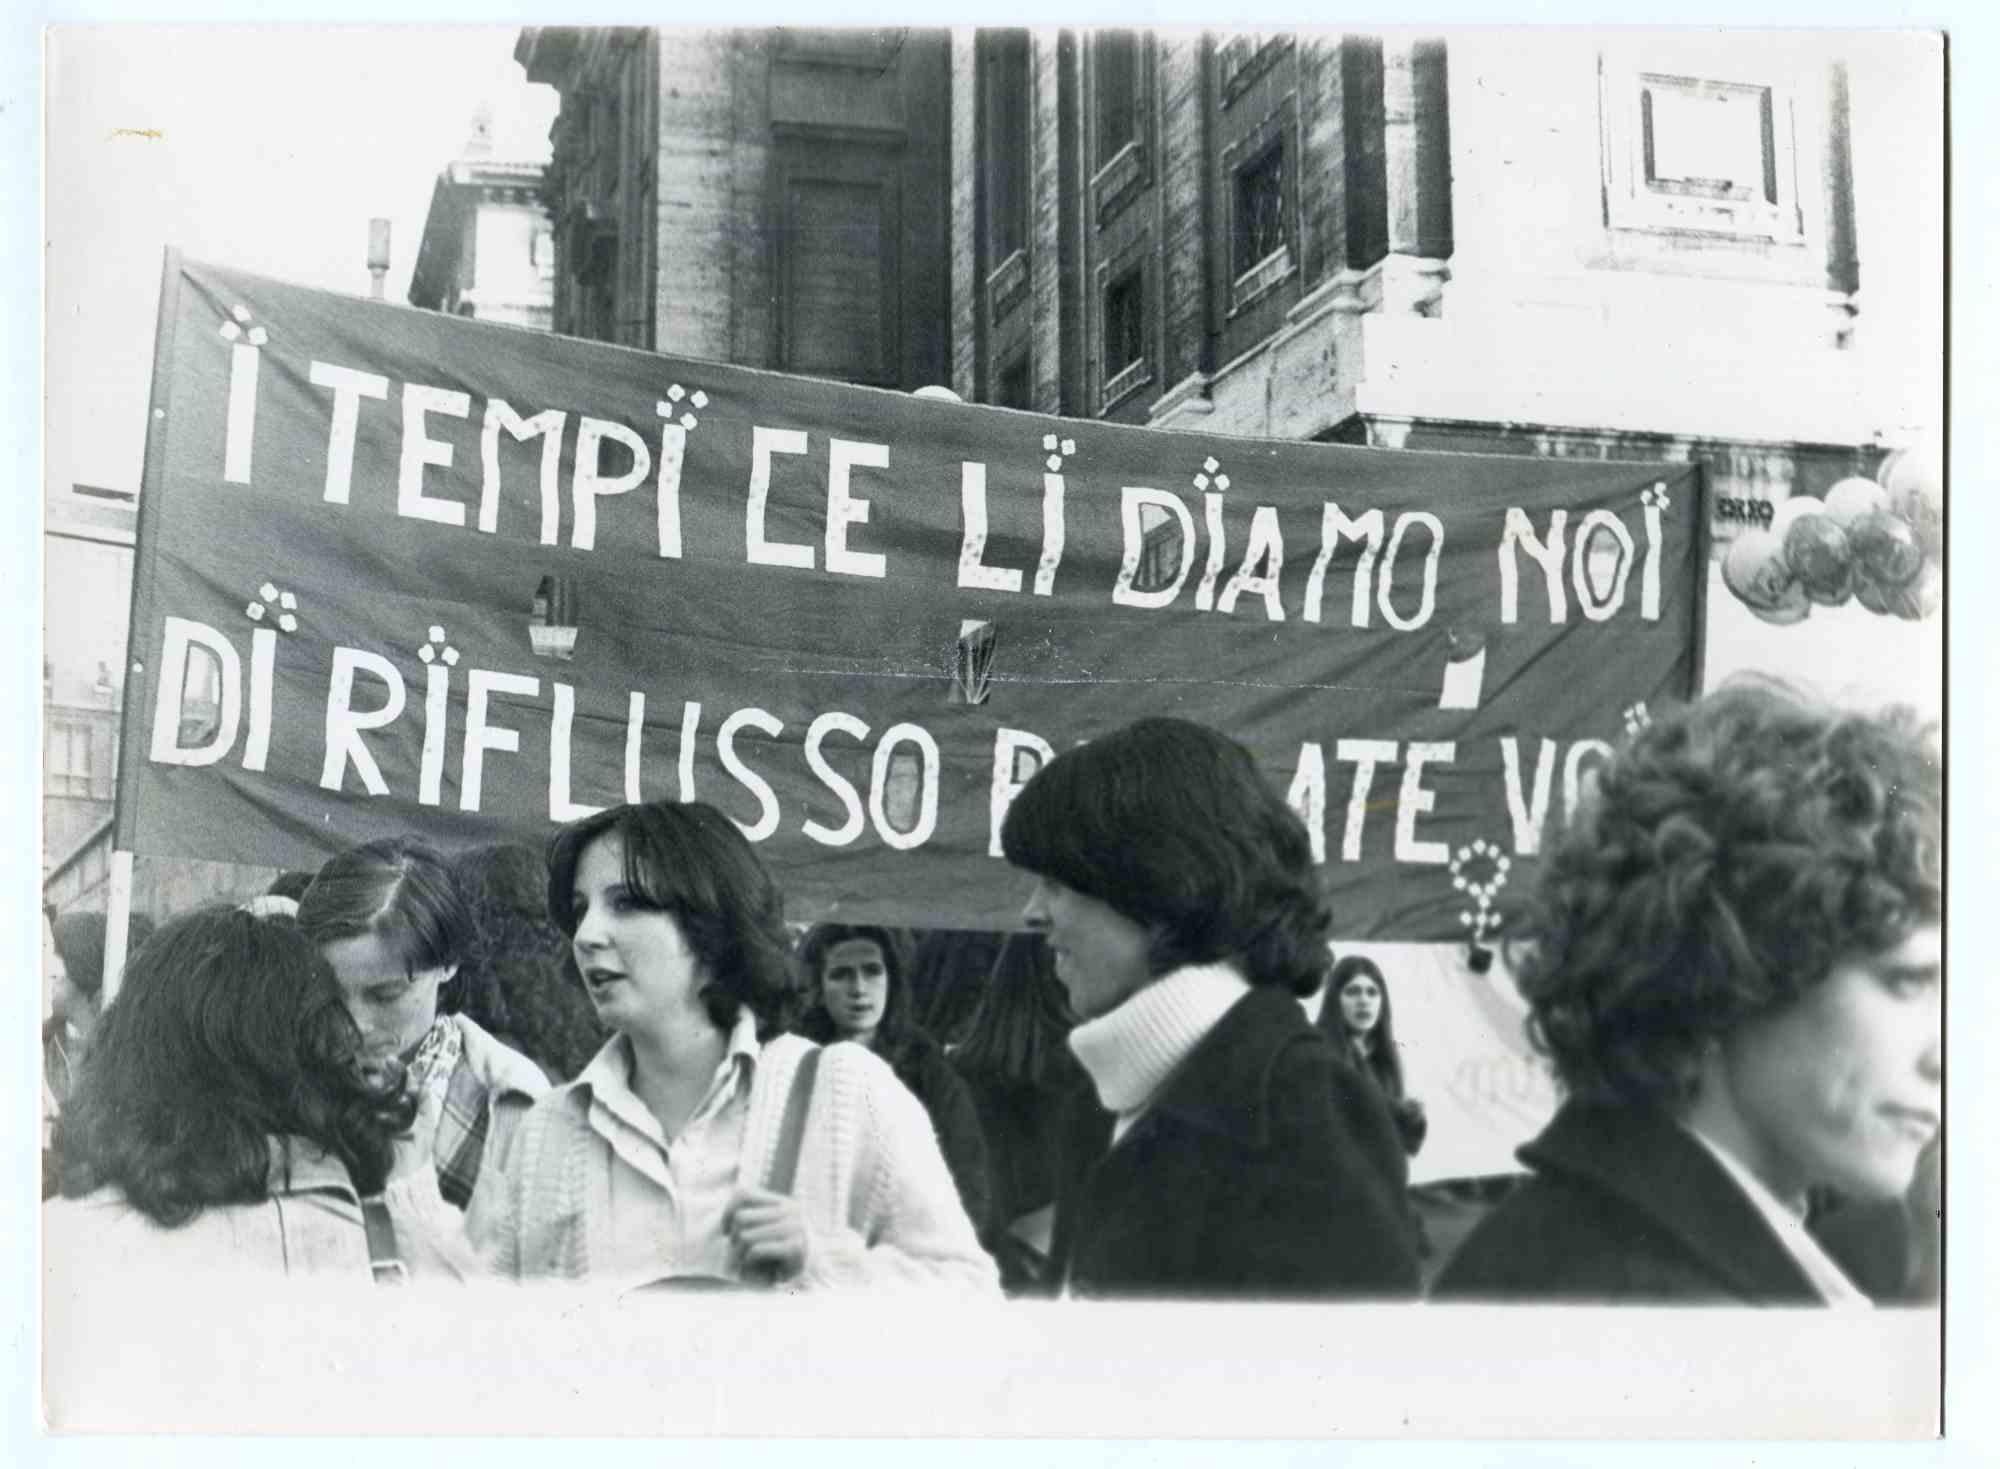 The Protest - Historical Photograph About the Feminist Movement - 1980s